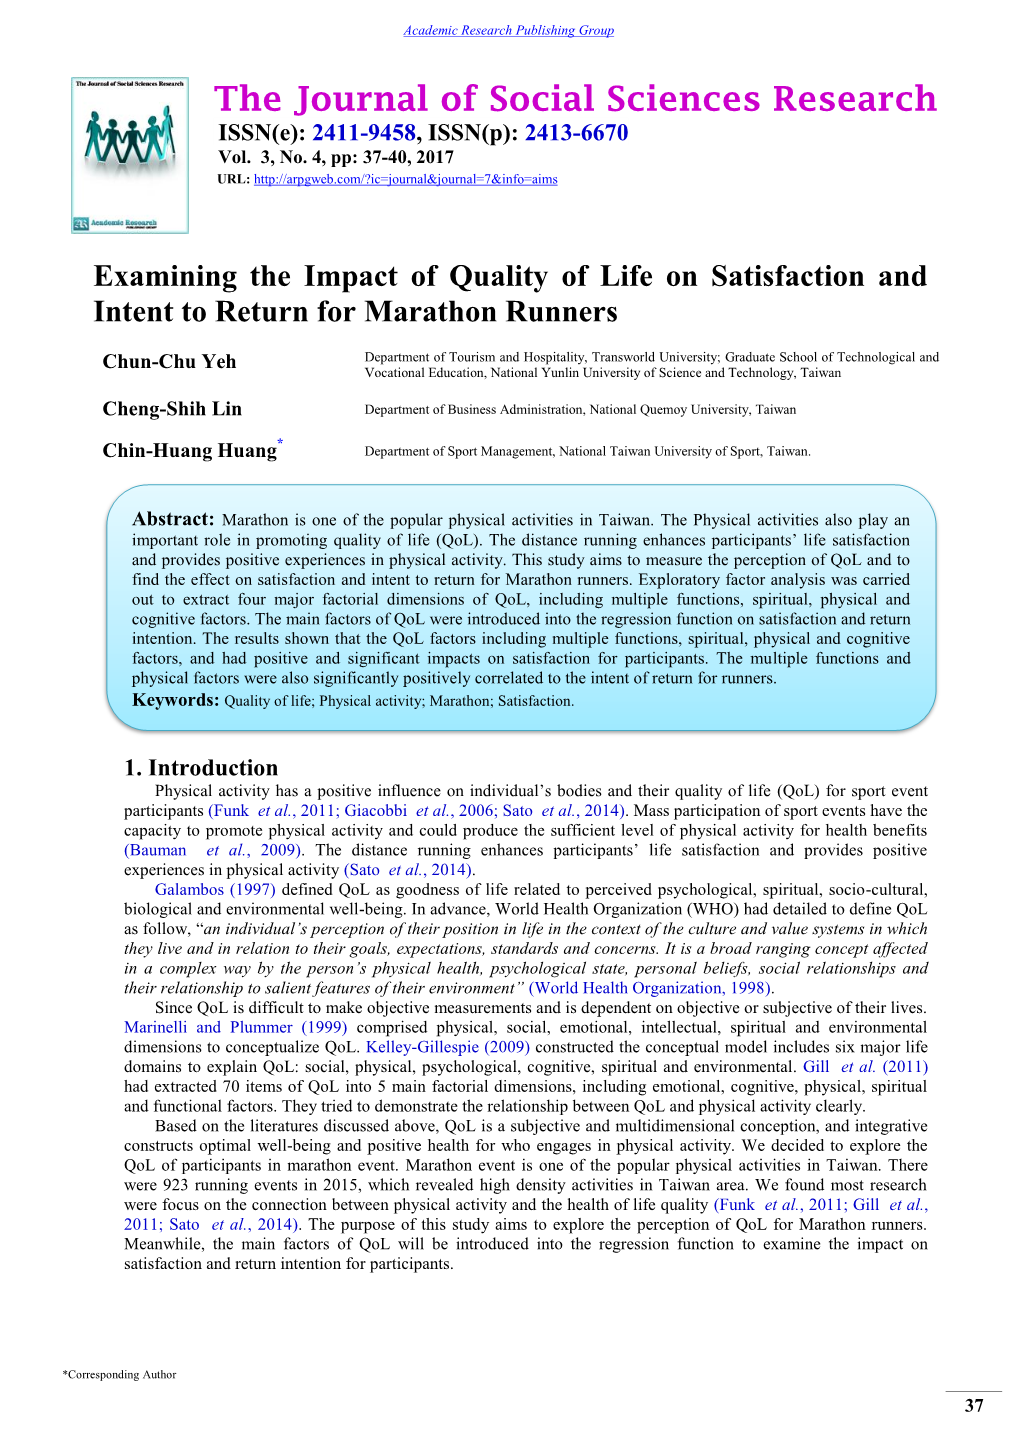 Examining the Impact of Quality of Life on Satisfaction and Intent to Return for Marathon Runners